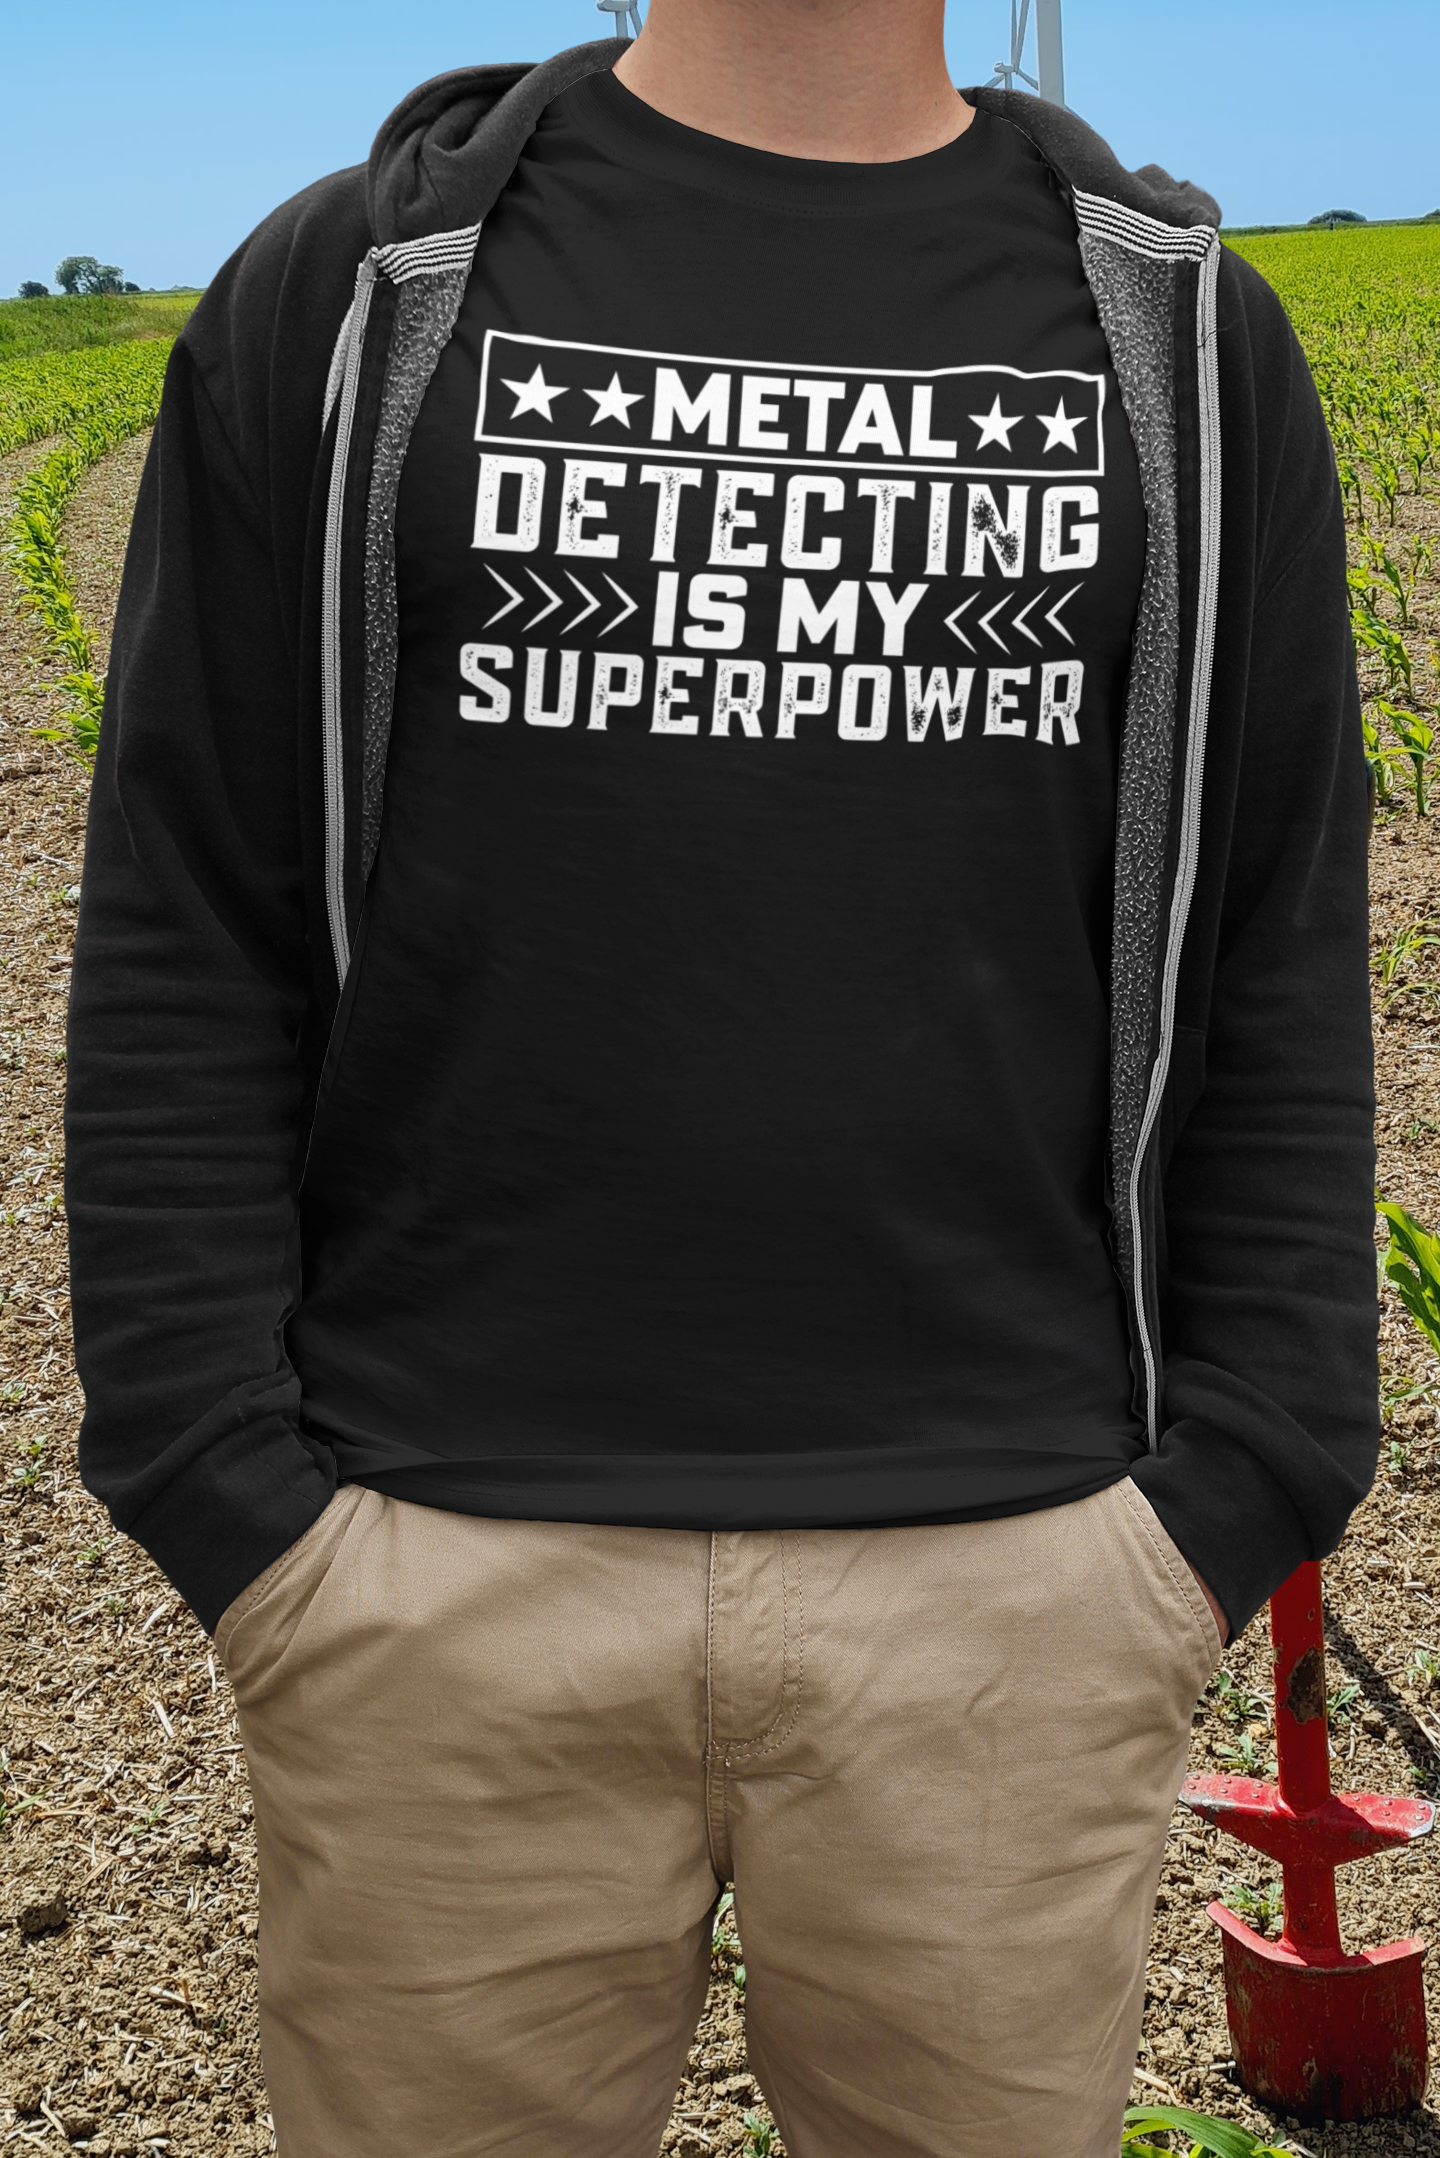 Metal detecting is my superpower T-shirt